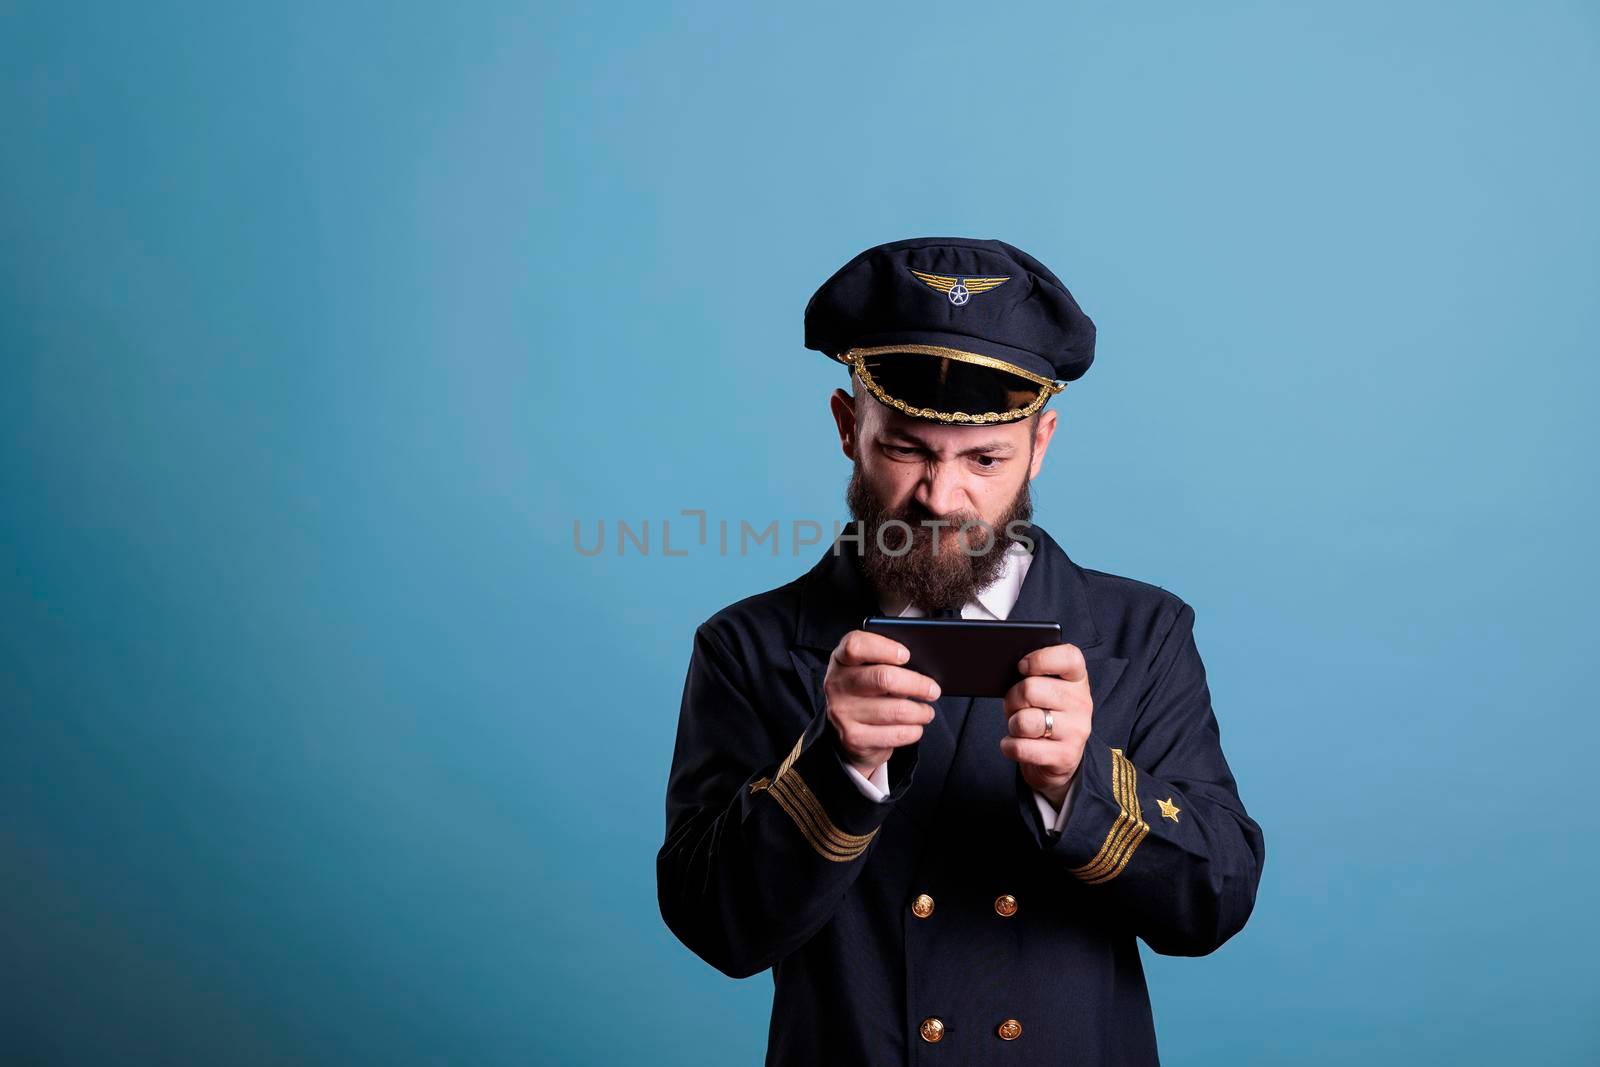 Plane captain in professional uniform playing mobile games on smartphone, holding phone, watching funny video. Airlane captain using aviation simulator on telephone, leisure entertainment